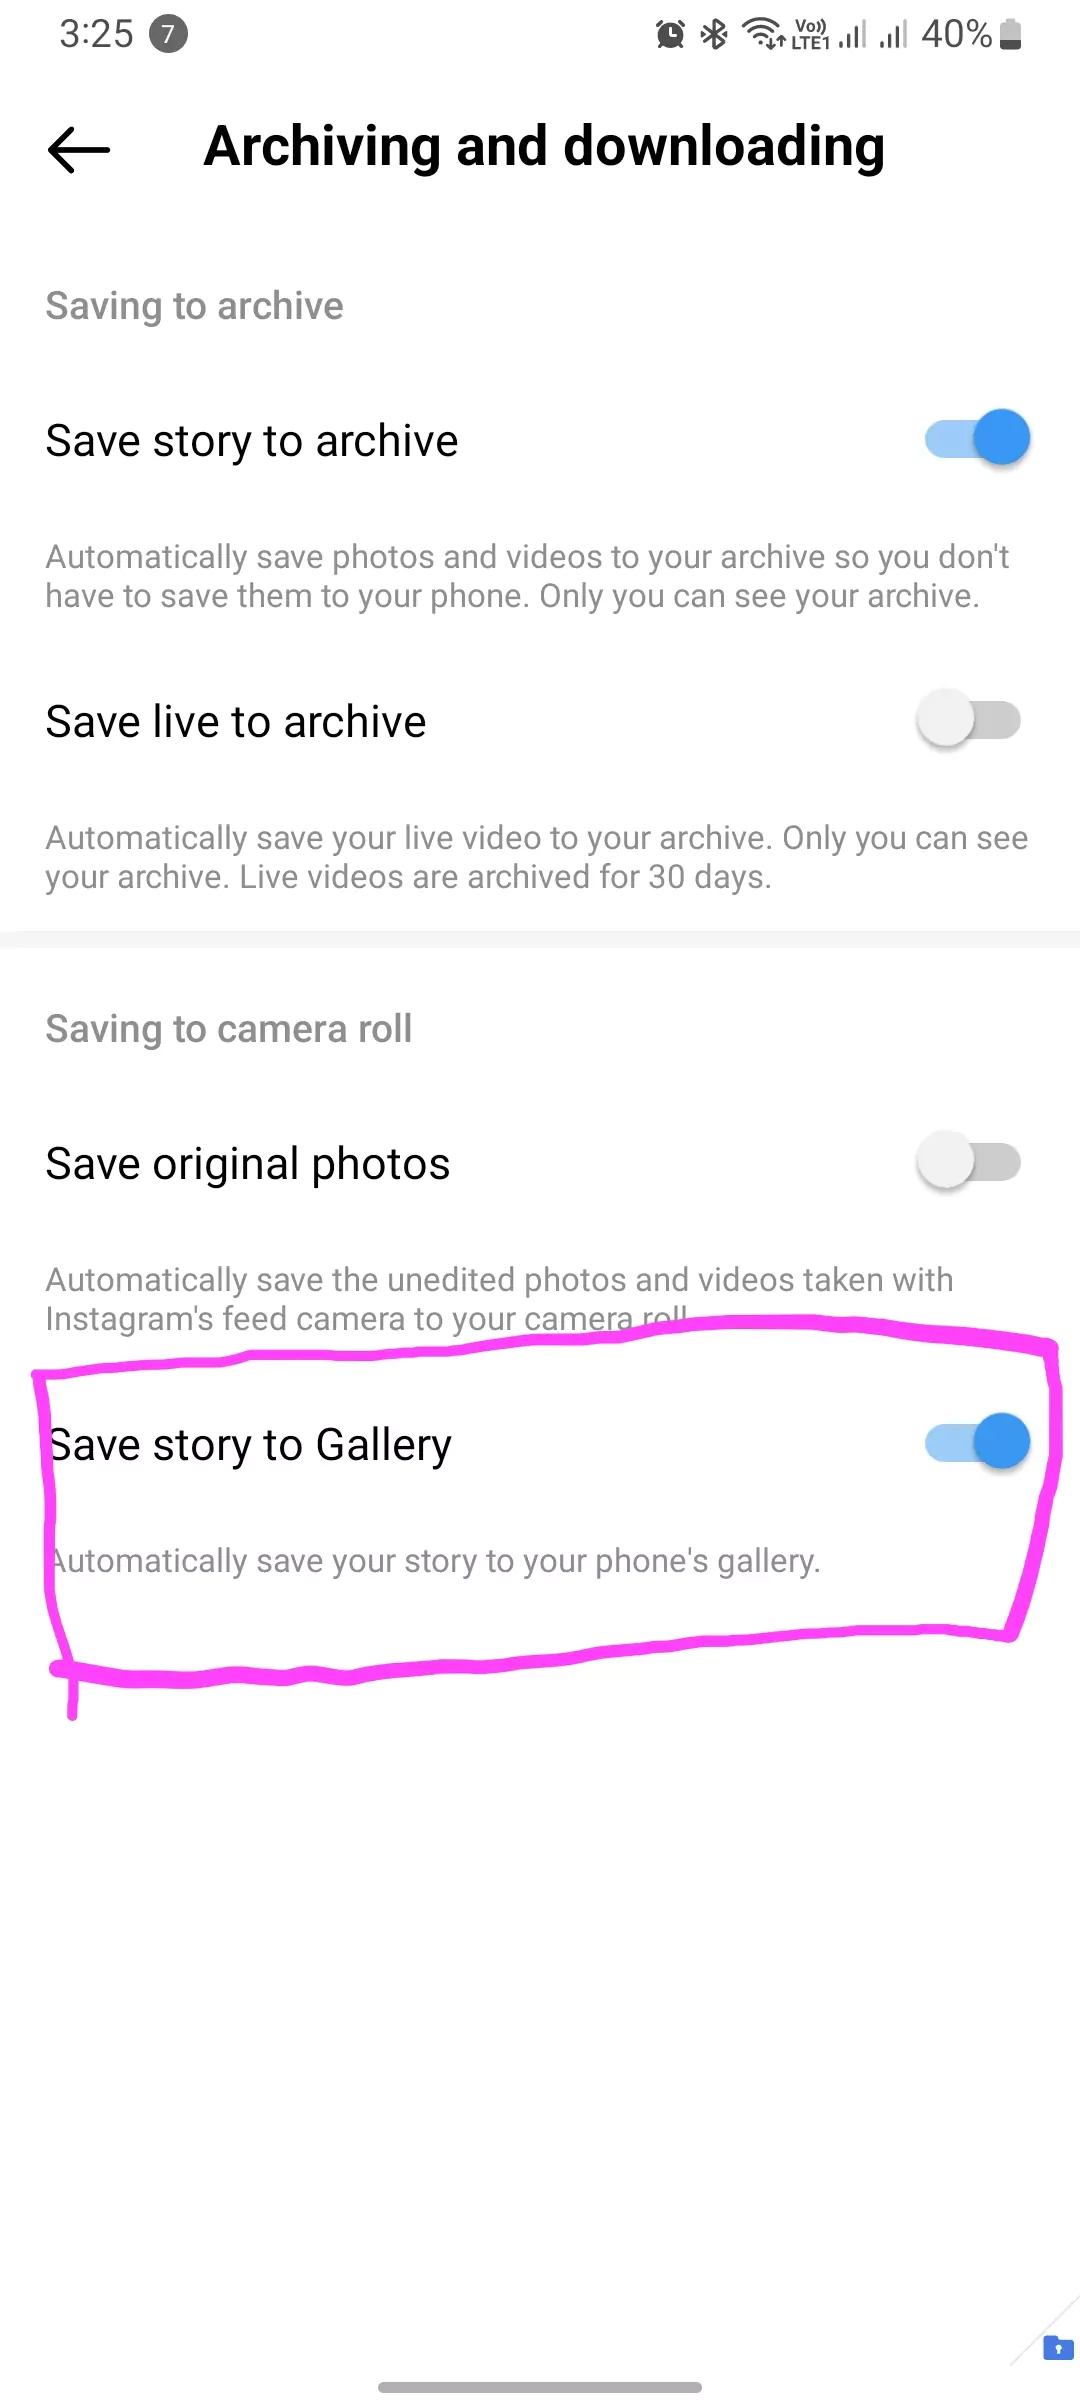 save story to gallery on instagram enabled